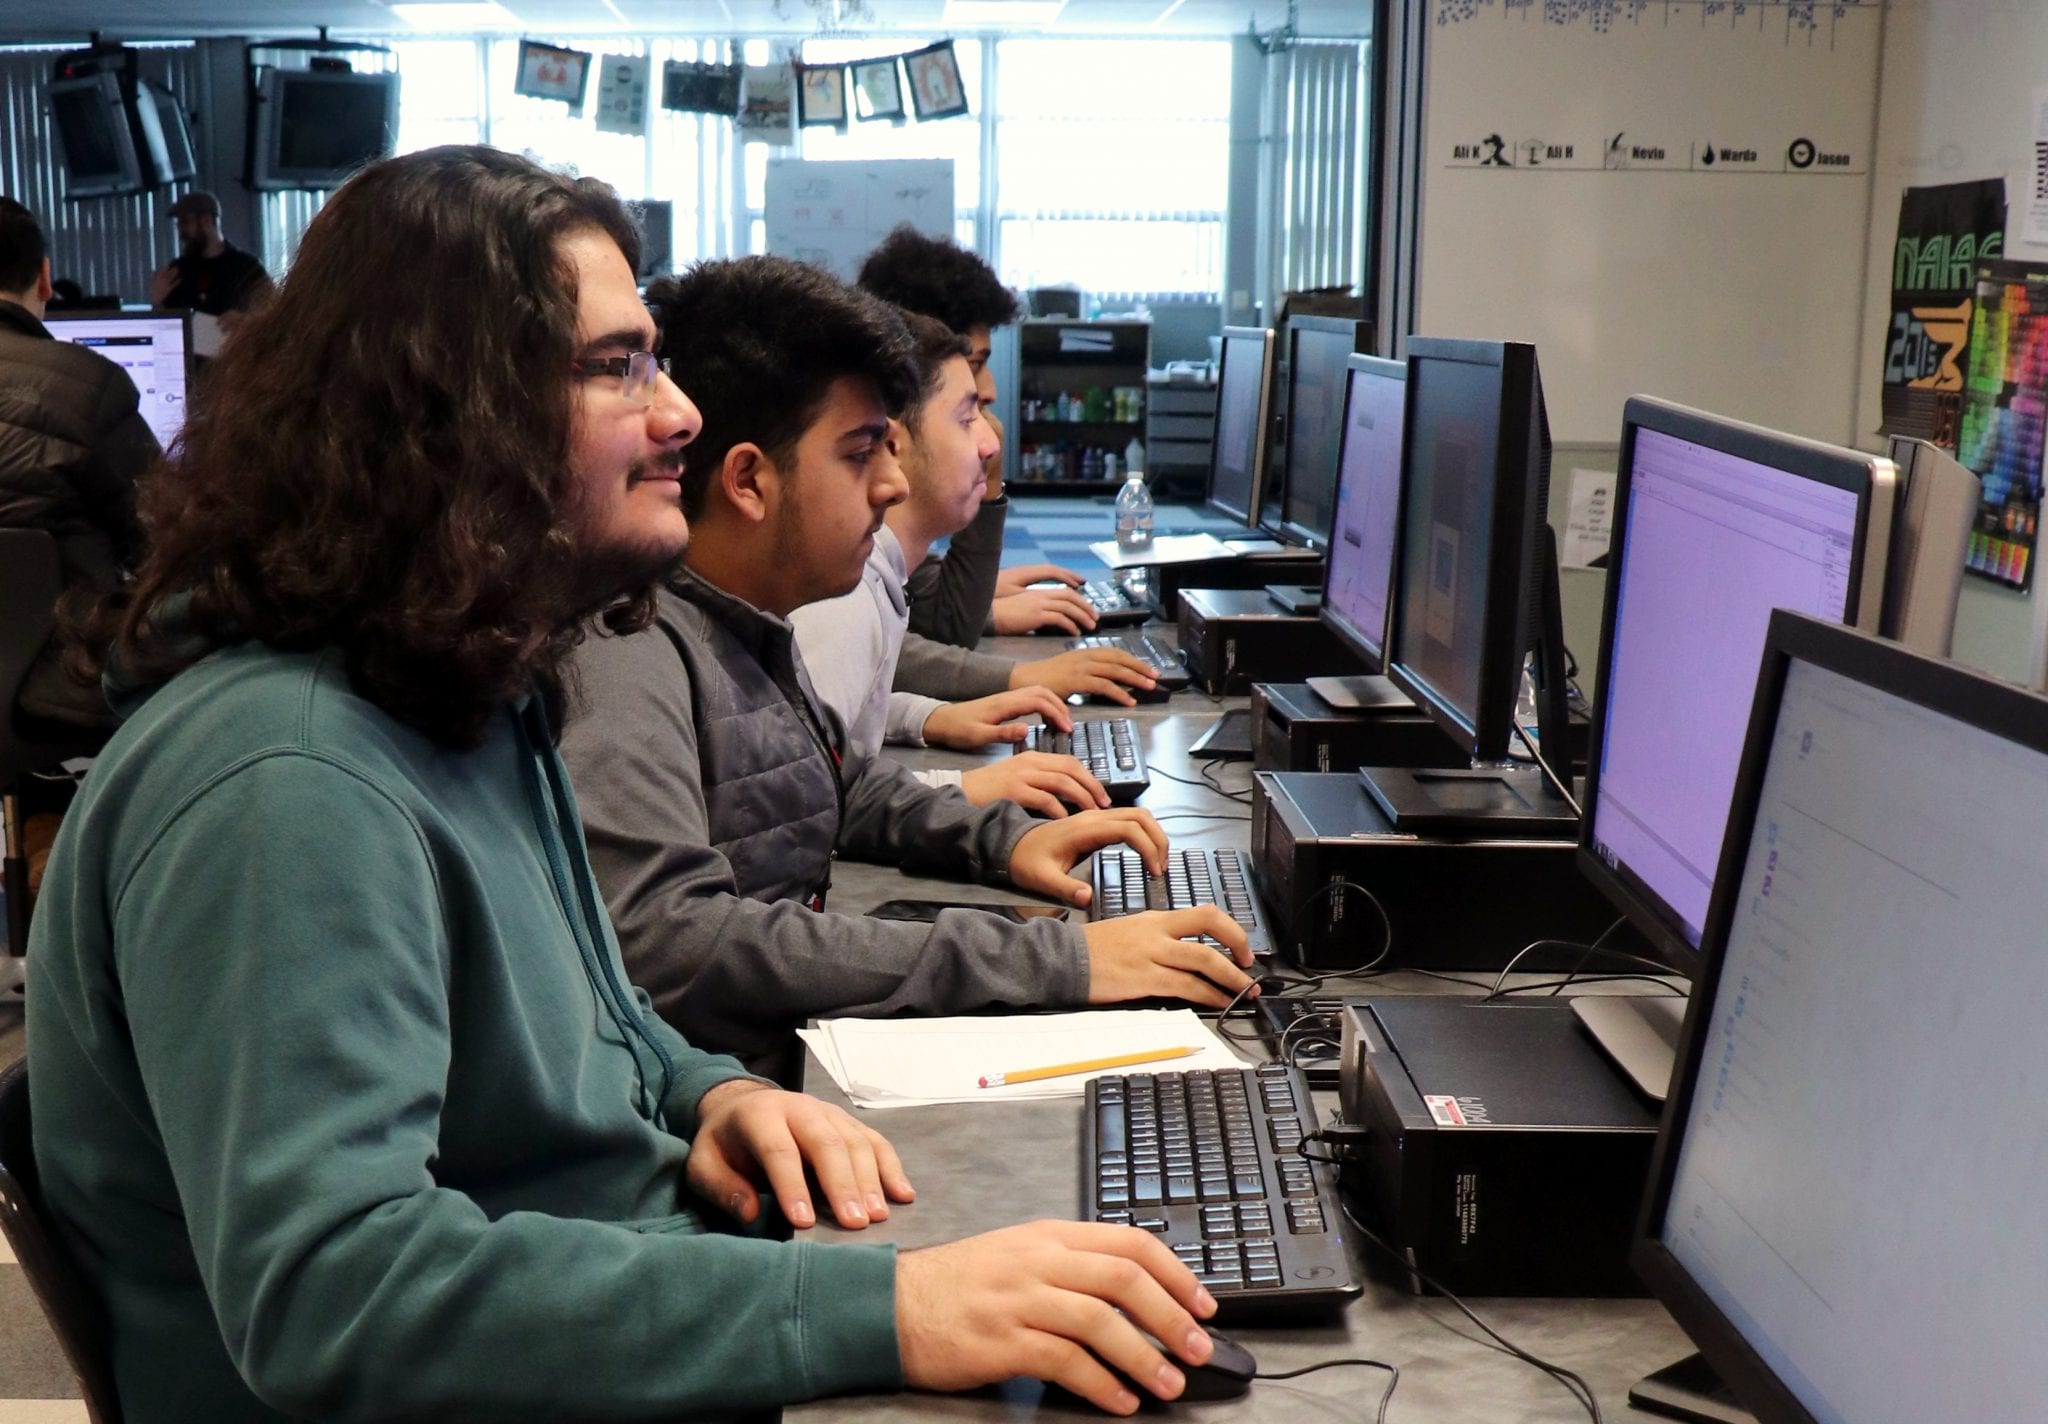 Students work on computers at Michael Berry Career Center.